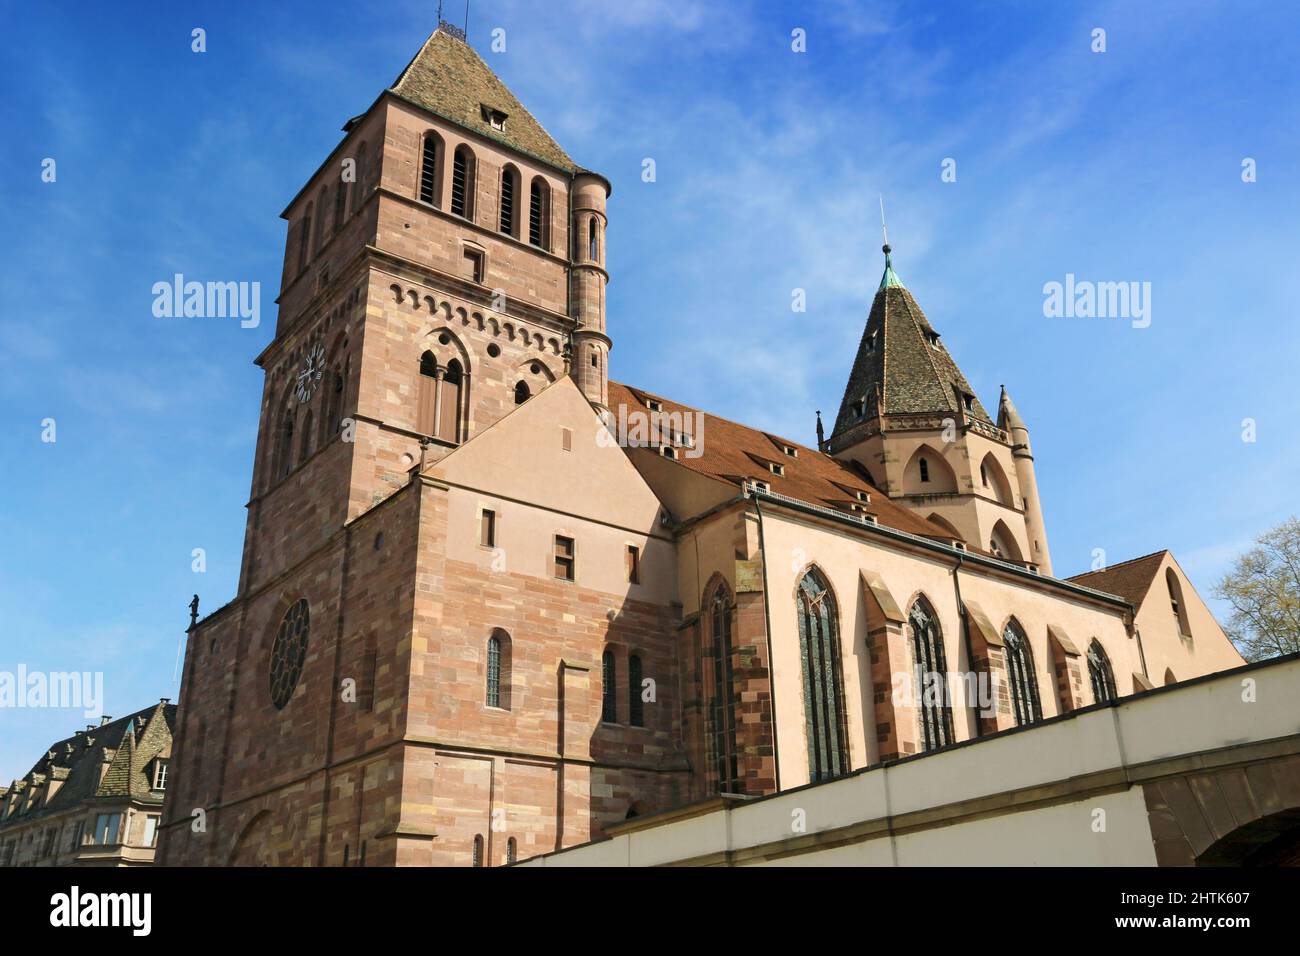 Saint Thomas Church in Strasbourg, located in the historic center of the city. Stock Photo